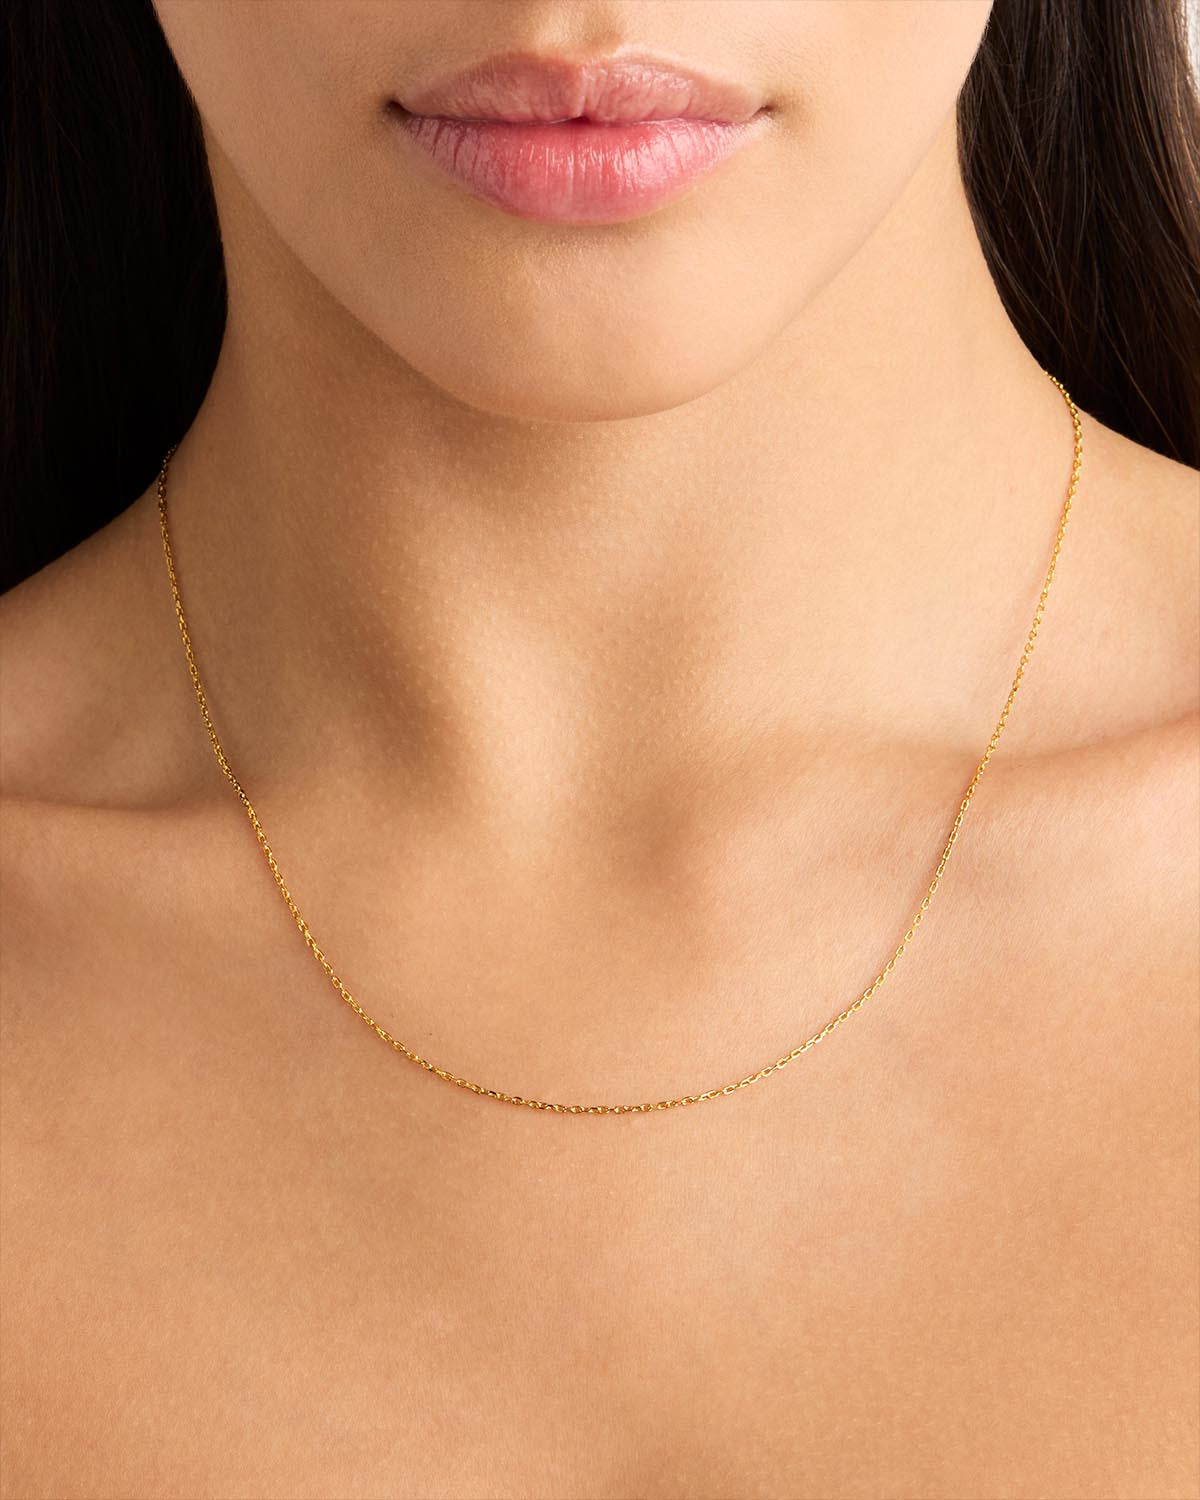 Buy Solid 14K Gold Chain Bismark Flat Link, Genuine 14K Gold Chain, Ladies  Gold Chain, 14kt Gold Necklace, Pendant Chain 14k Online in India - Etsy